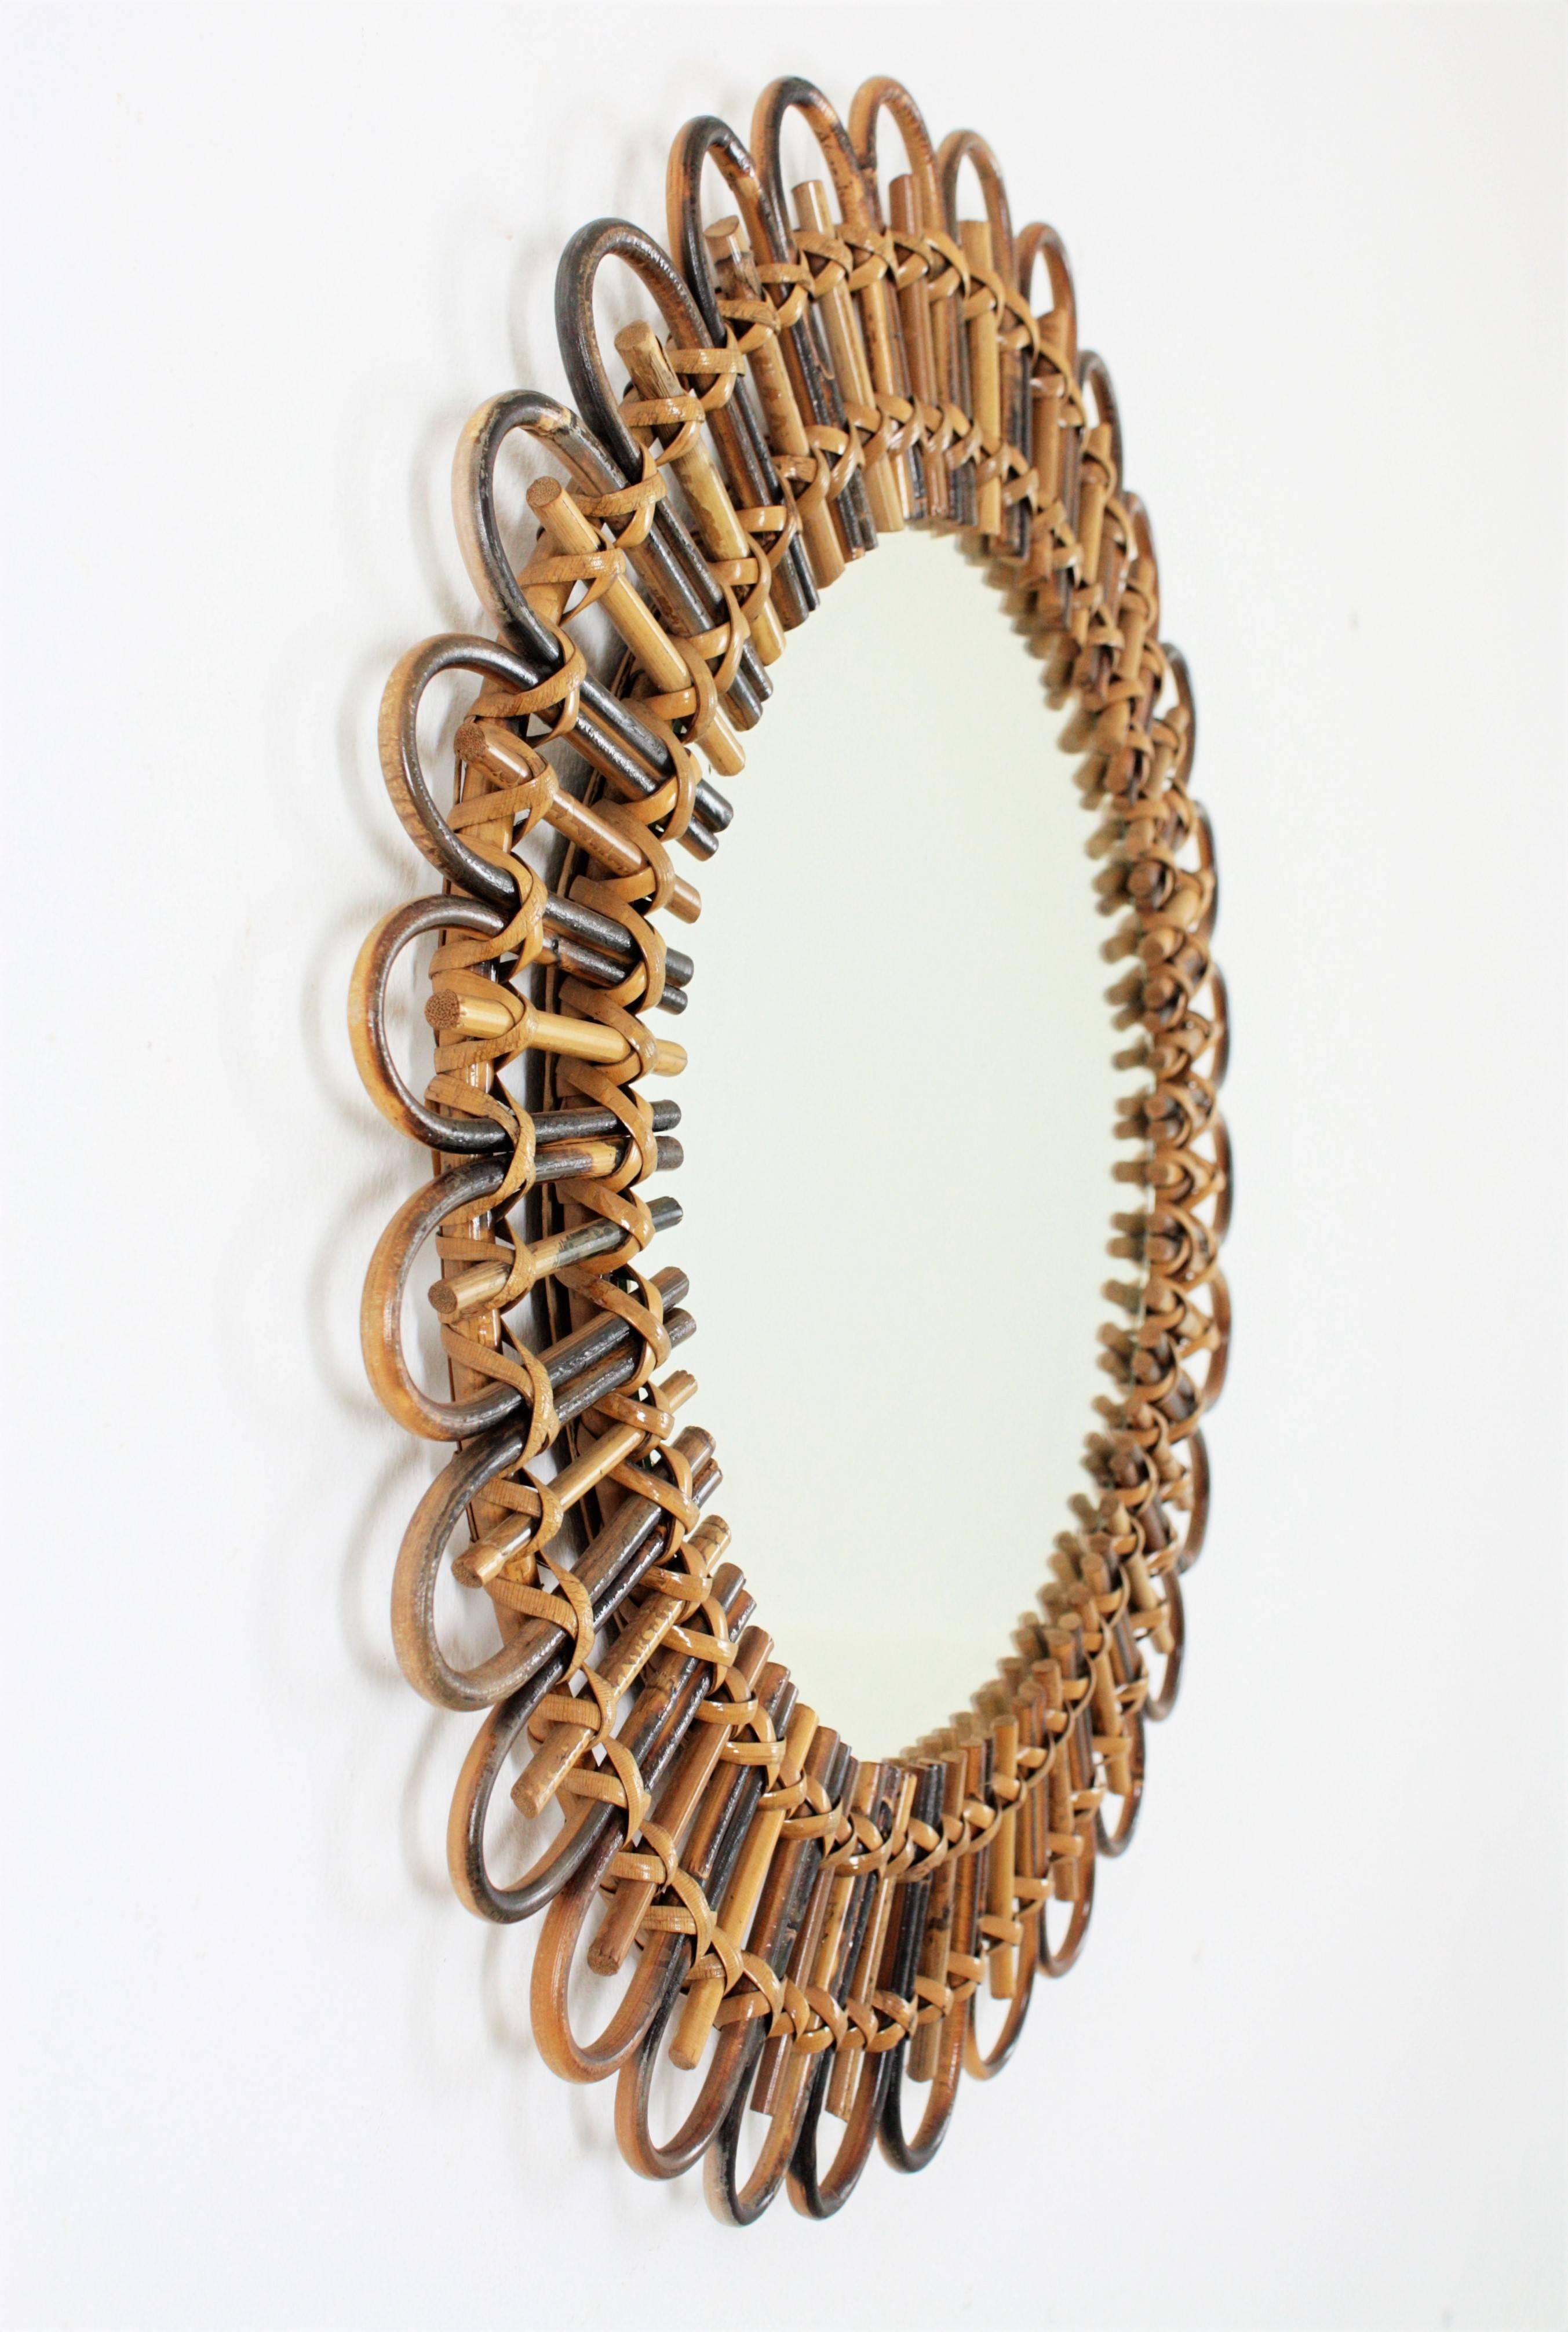 French Mediterranean Coast Two-Tone Rattan Bamboo Flower Shaped Mirror, France, 1960s